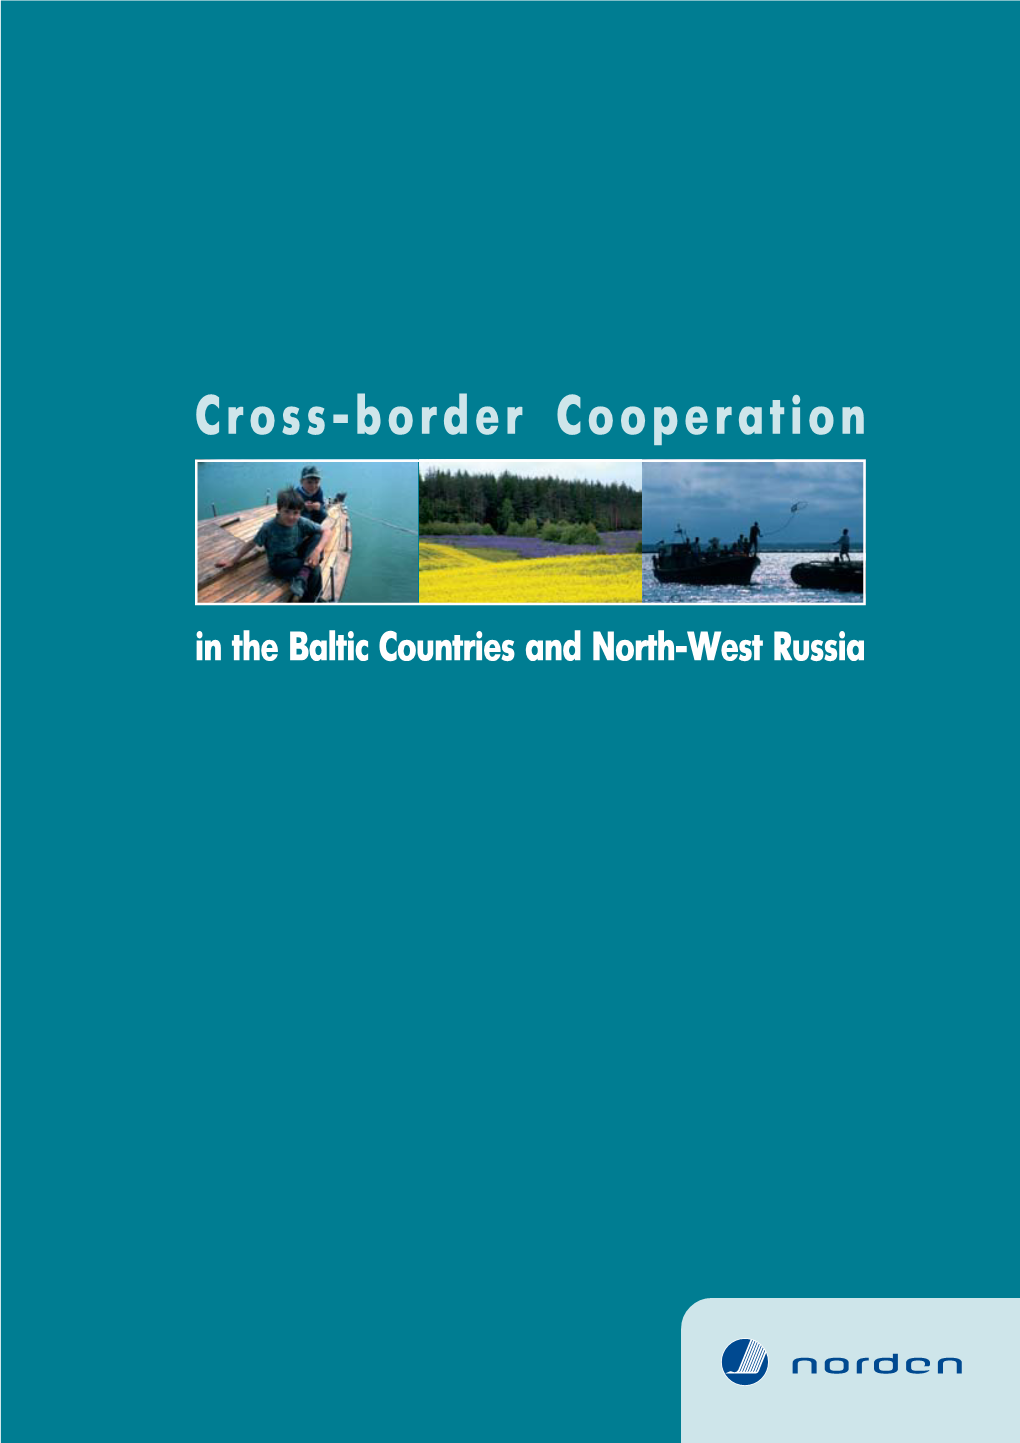 Cross-Border Cooperation in the Baltic Countries and North-West Russia and the Work of the Nordic Council of Ministers